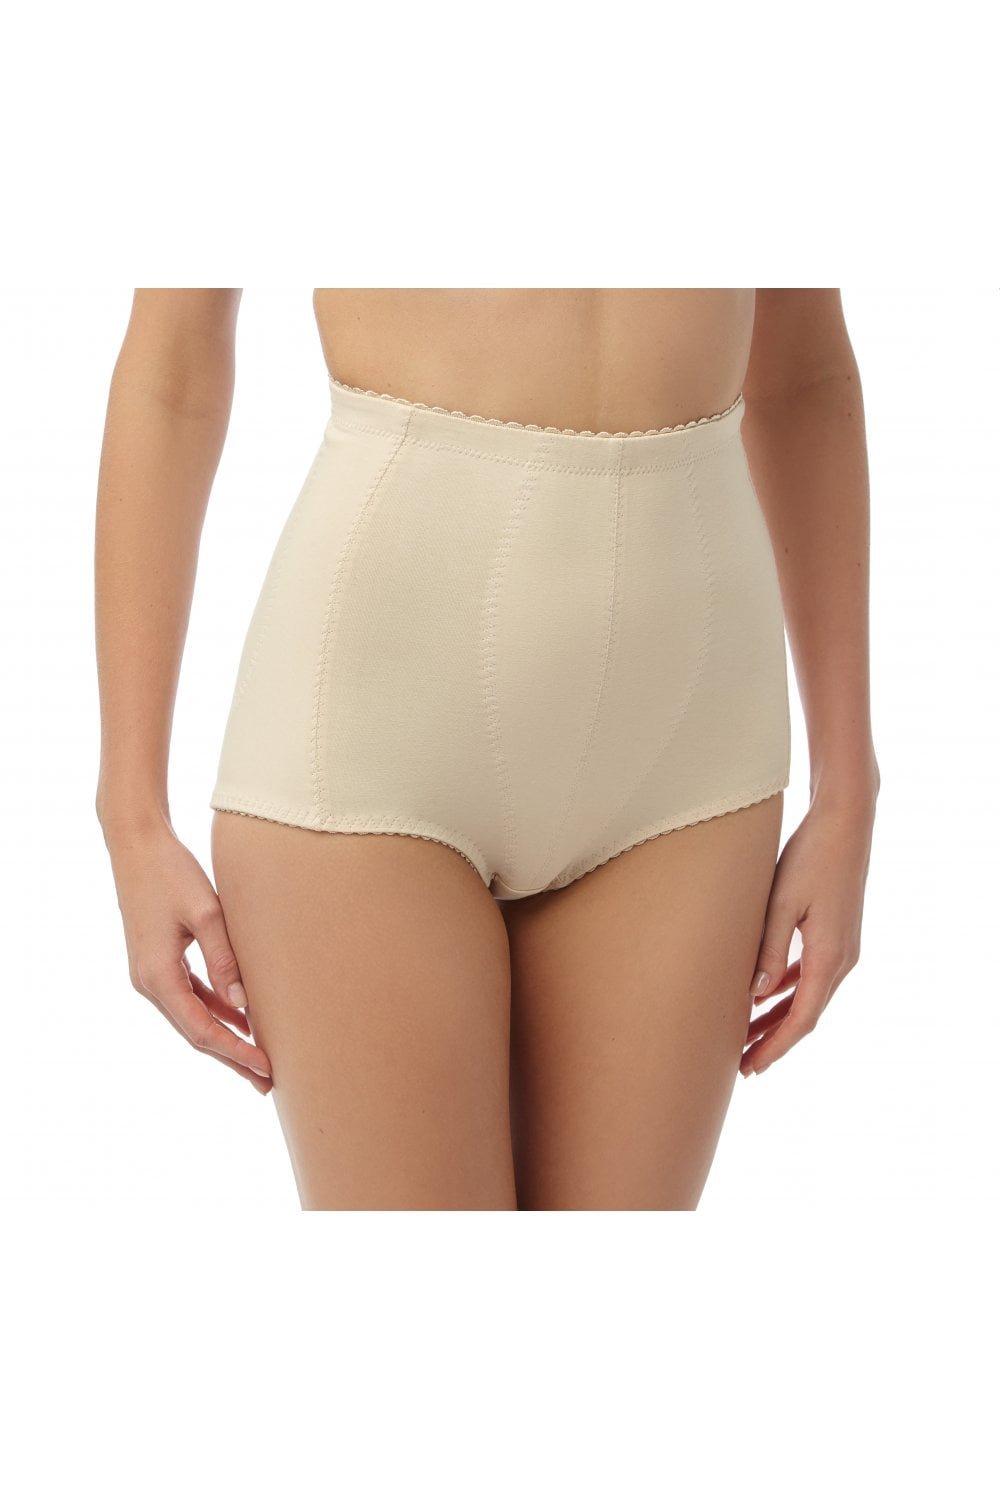 Two Pack Cotton High Waisted Comfort Control Full Briefs